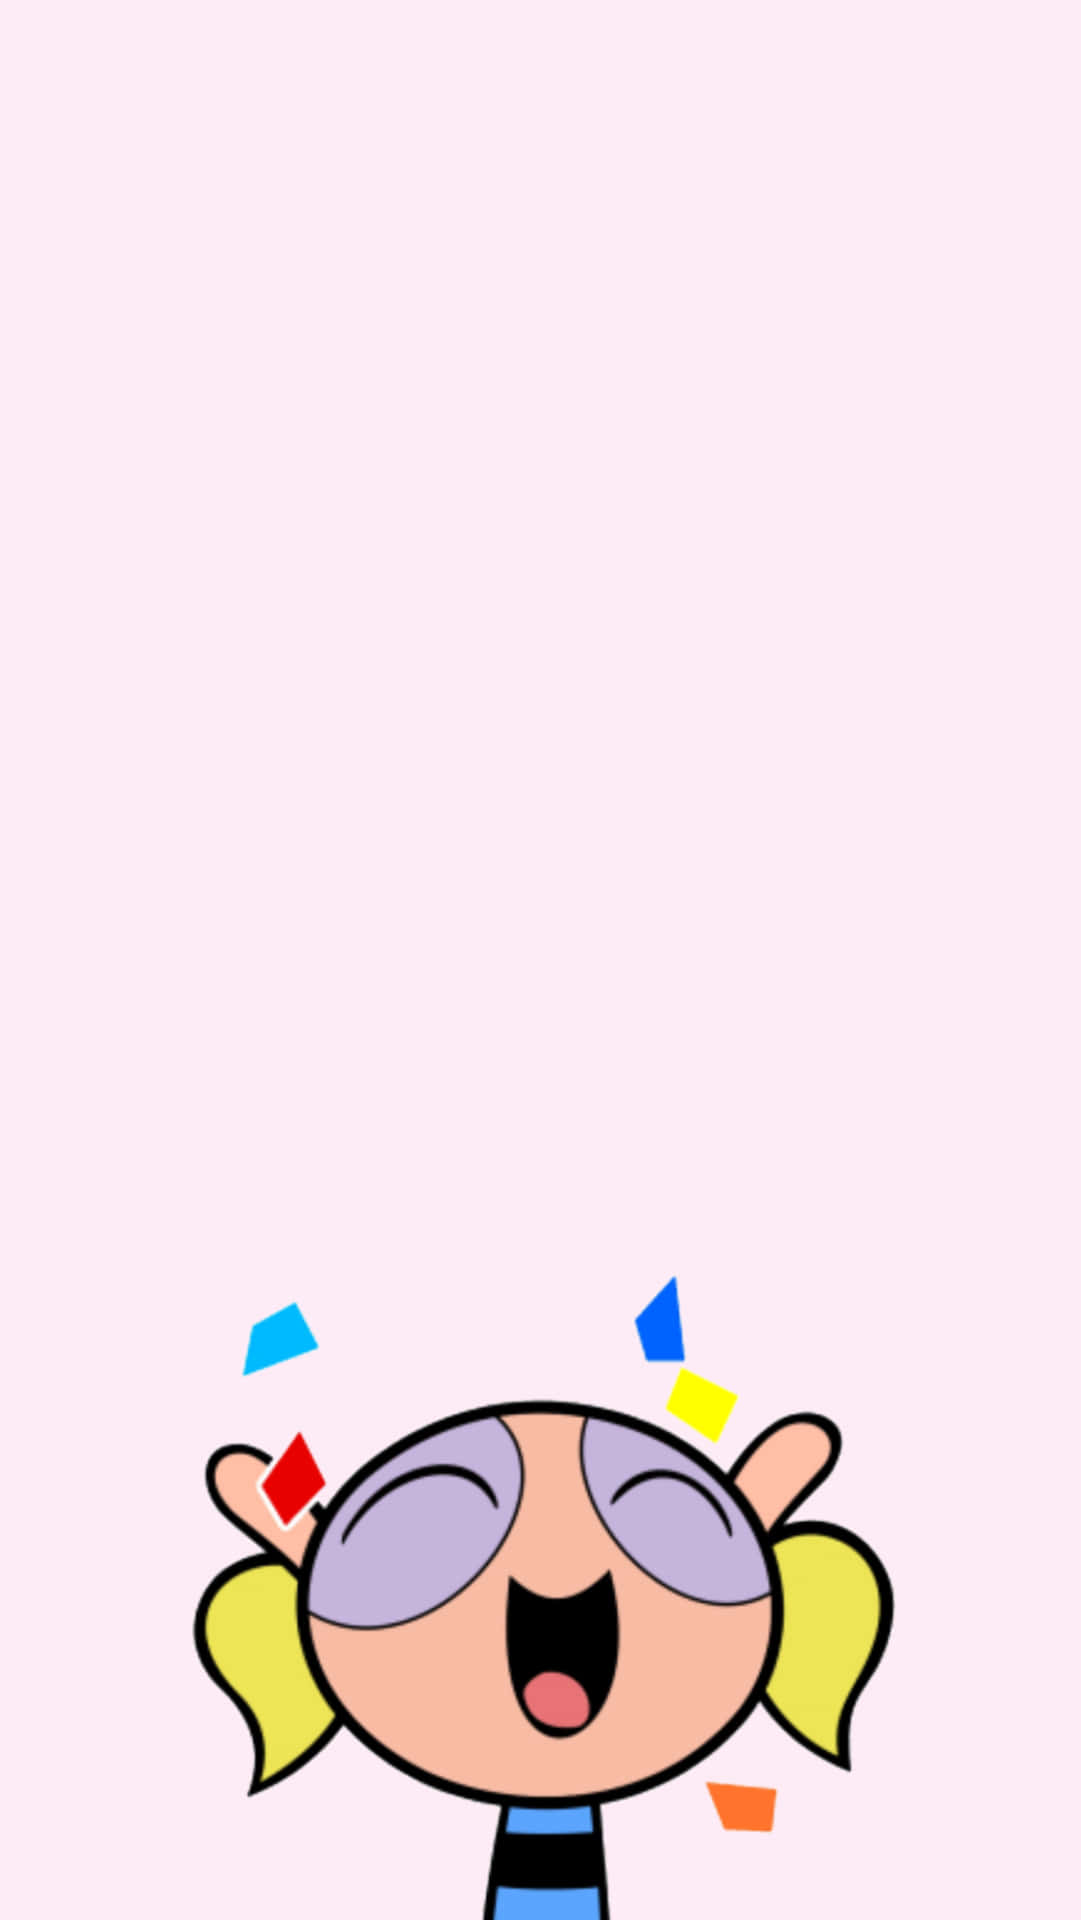 Download this free wallpaper with an image of the character from the cartoon The Powerpuff Girls. - Bubbles